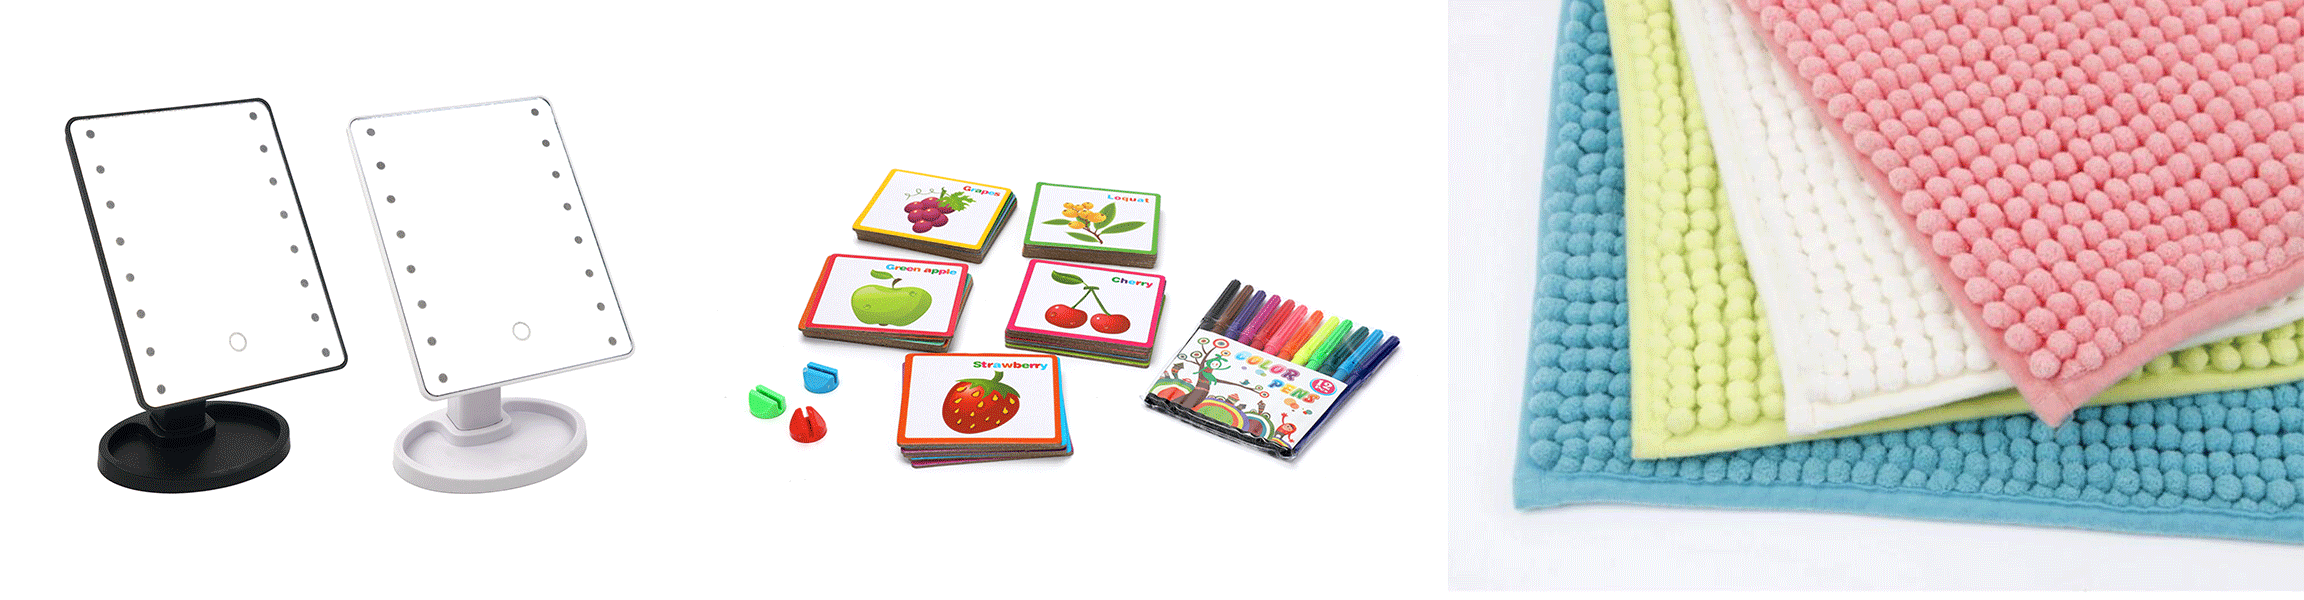 Good Seller Hot Sale Children Drawing & Reading Set DIY Painting Educational Toys